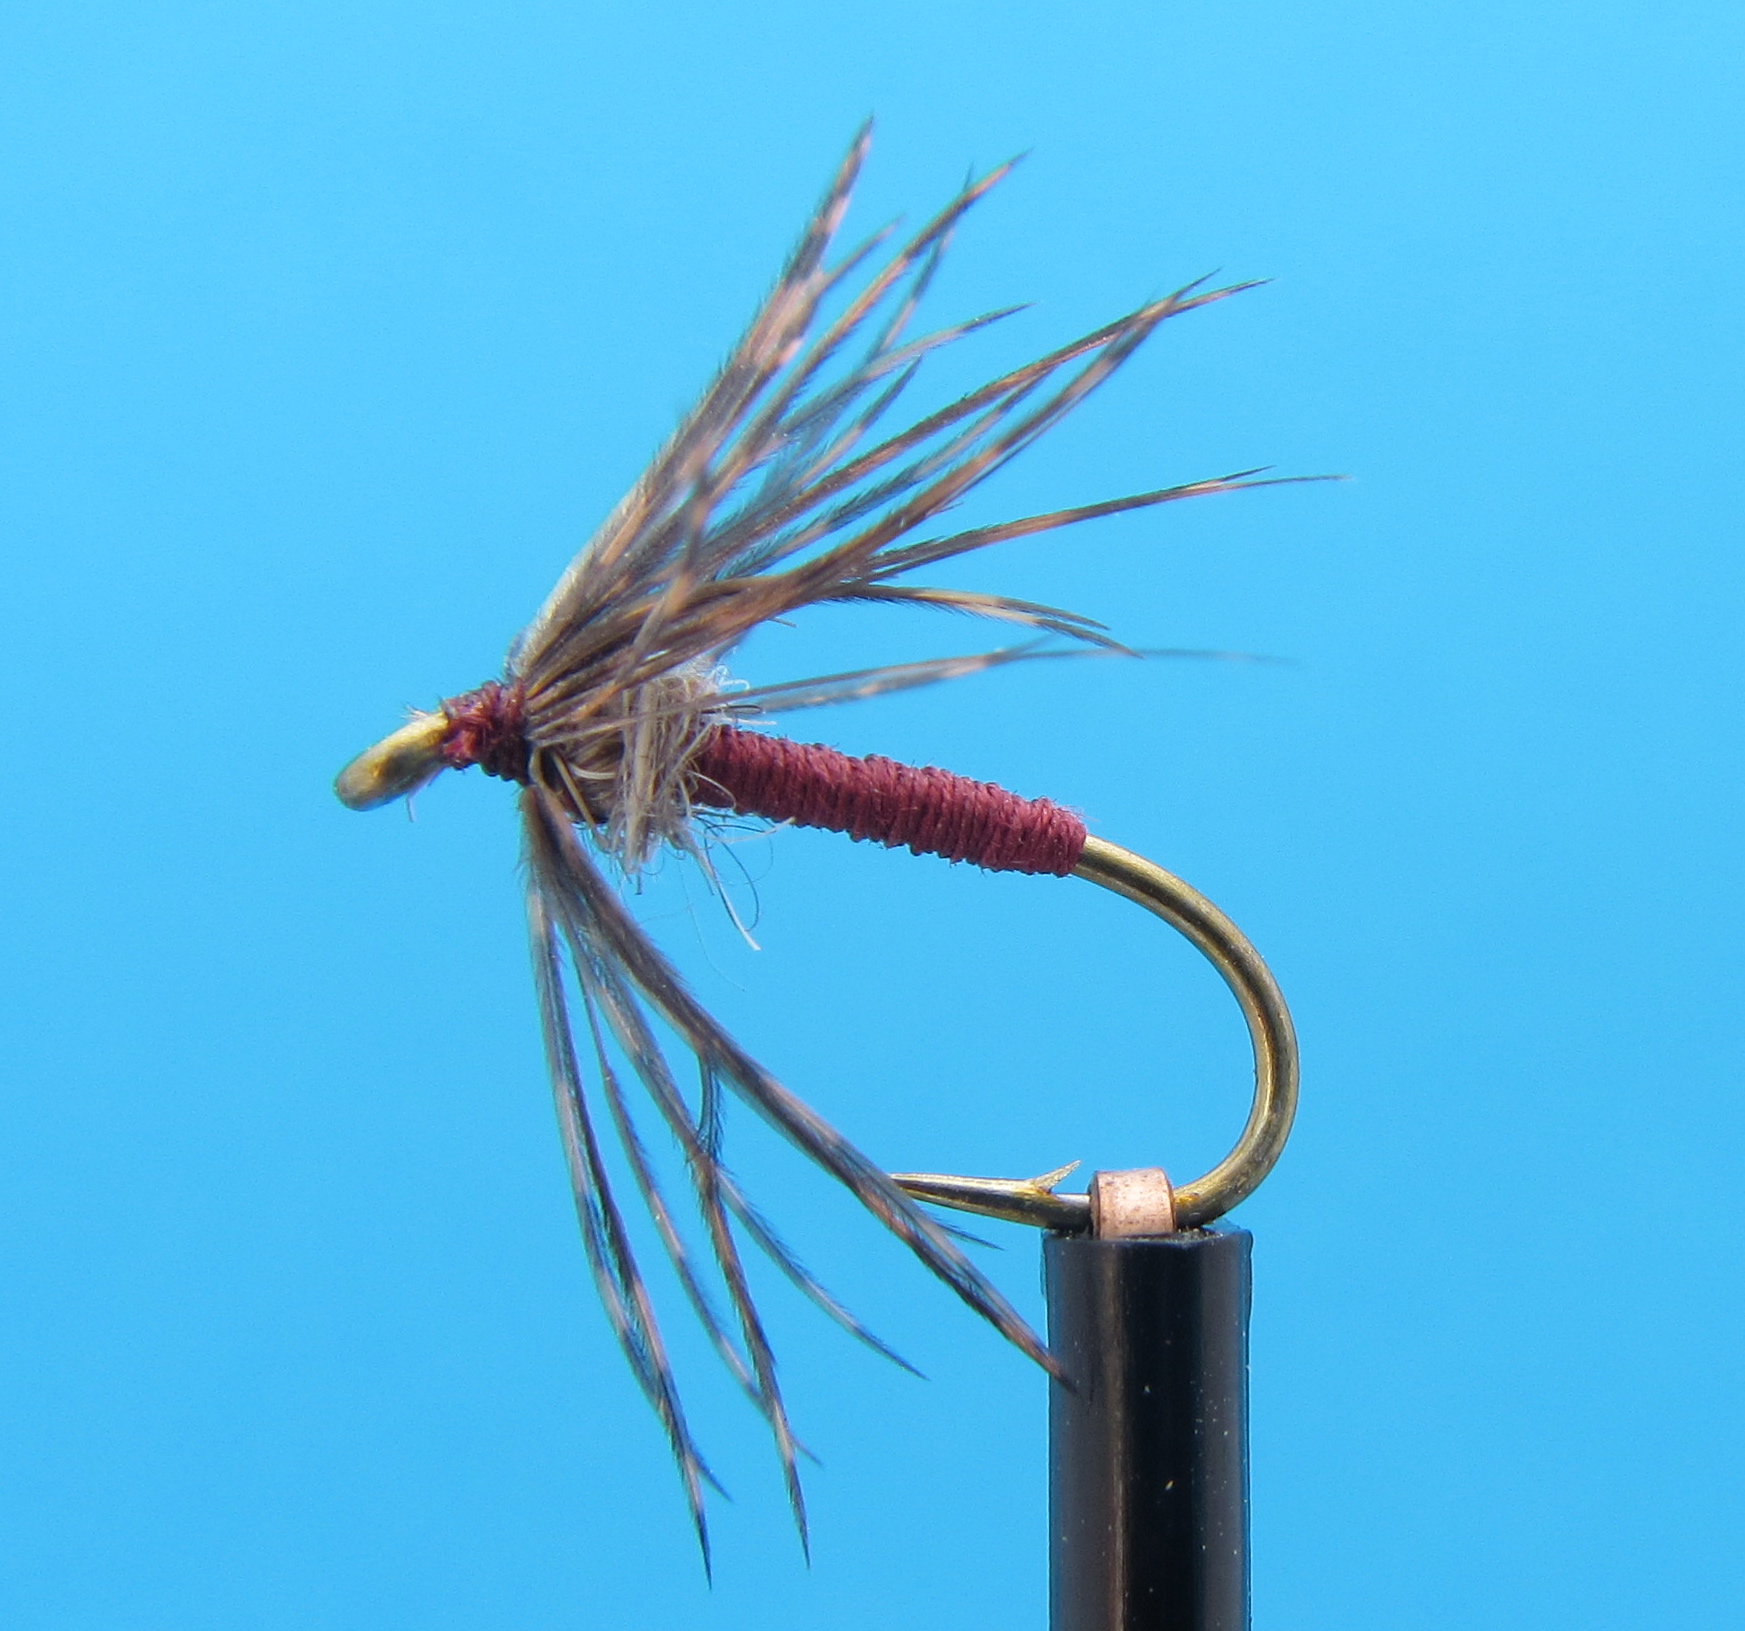 Wet Fly 101: Take the ancient and traditional path to subsurface success